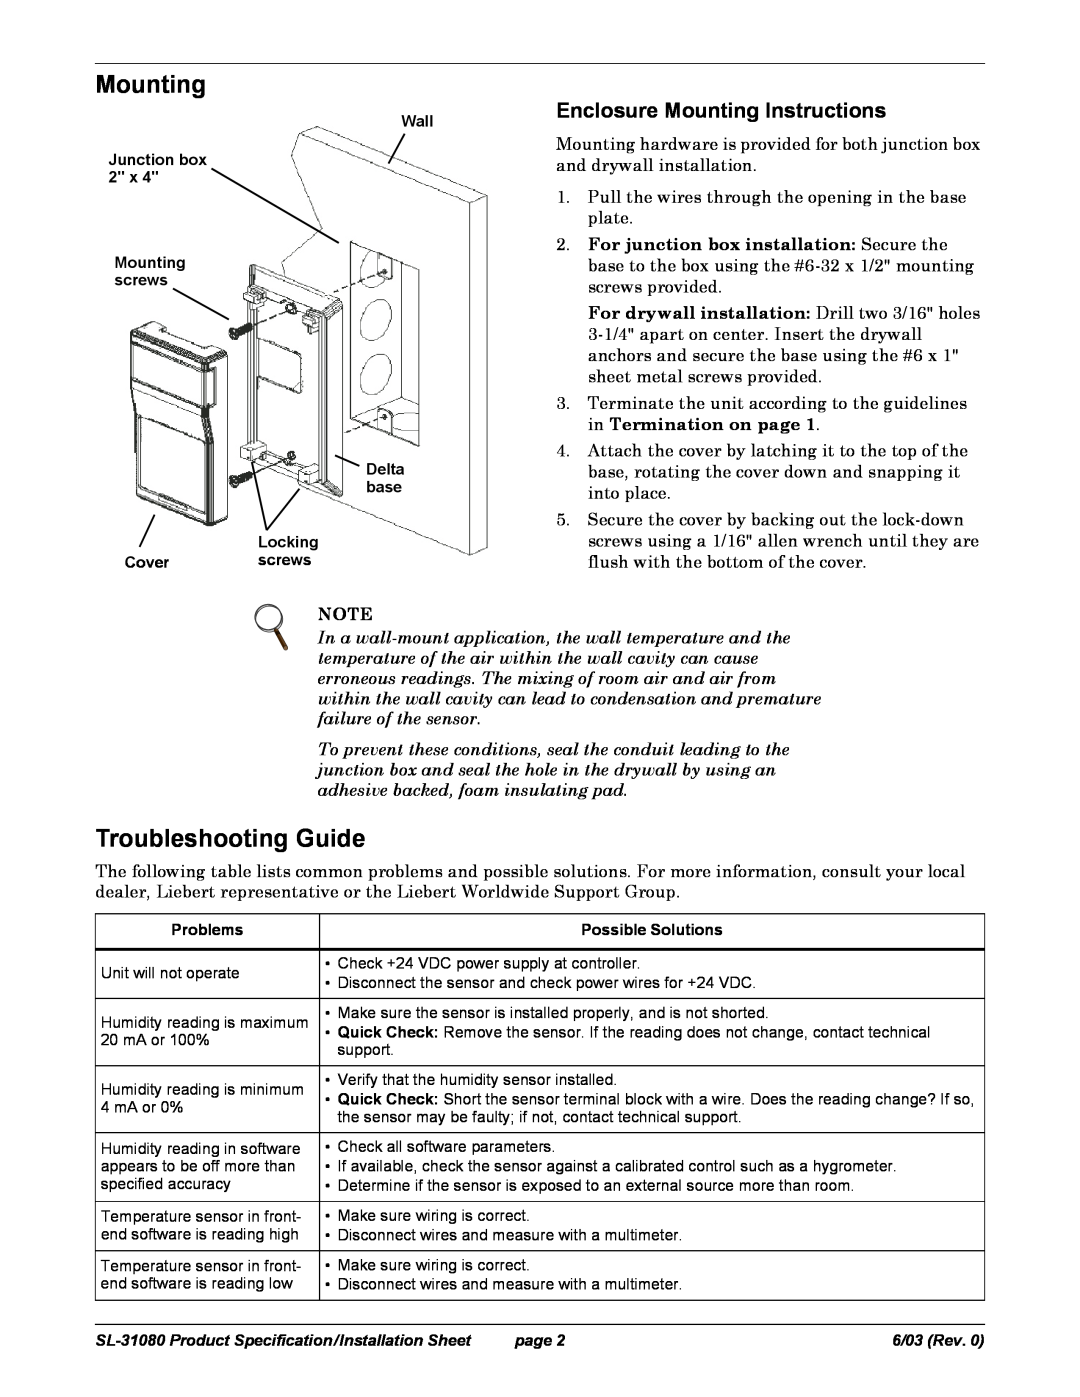 Emerson SL-31080 specifications Troubleshooting Guide, Enclosure Mounting Instructions 